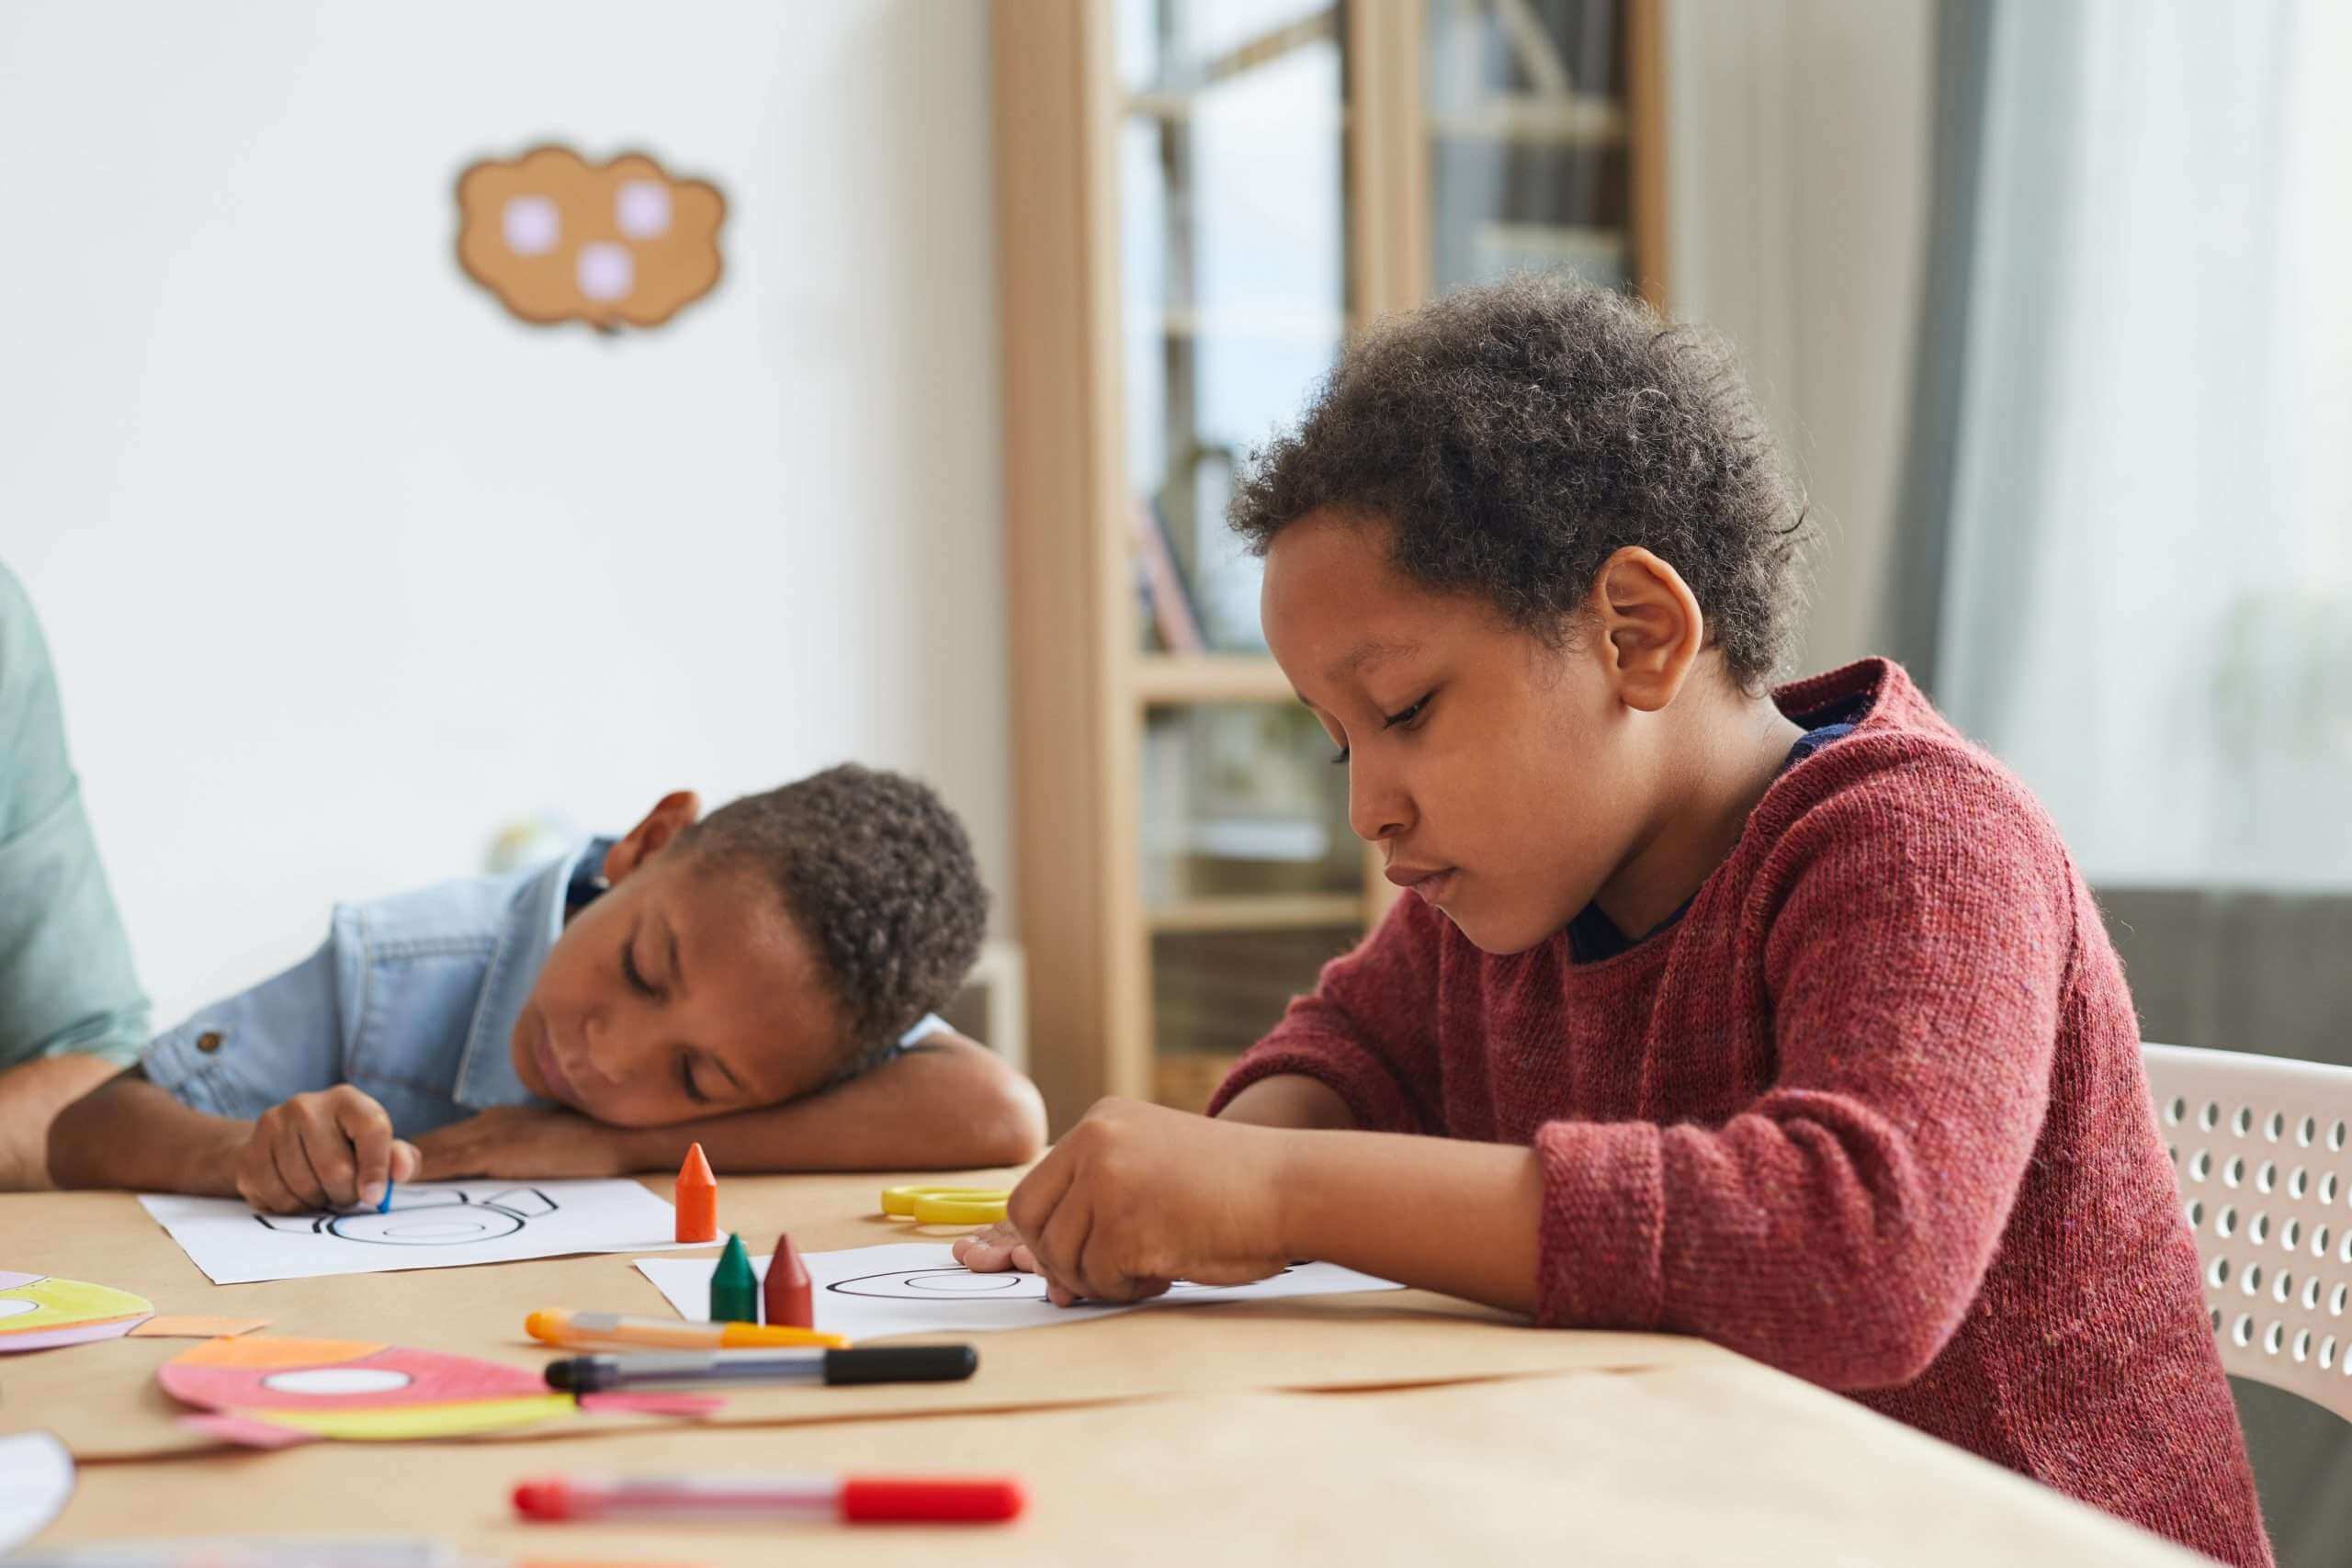 Black Kids doing homework with crayons in art